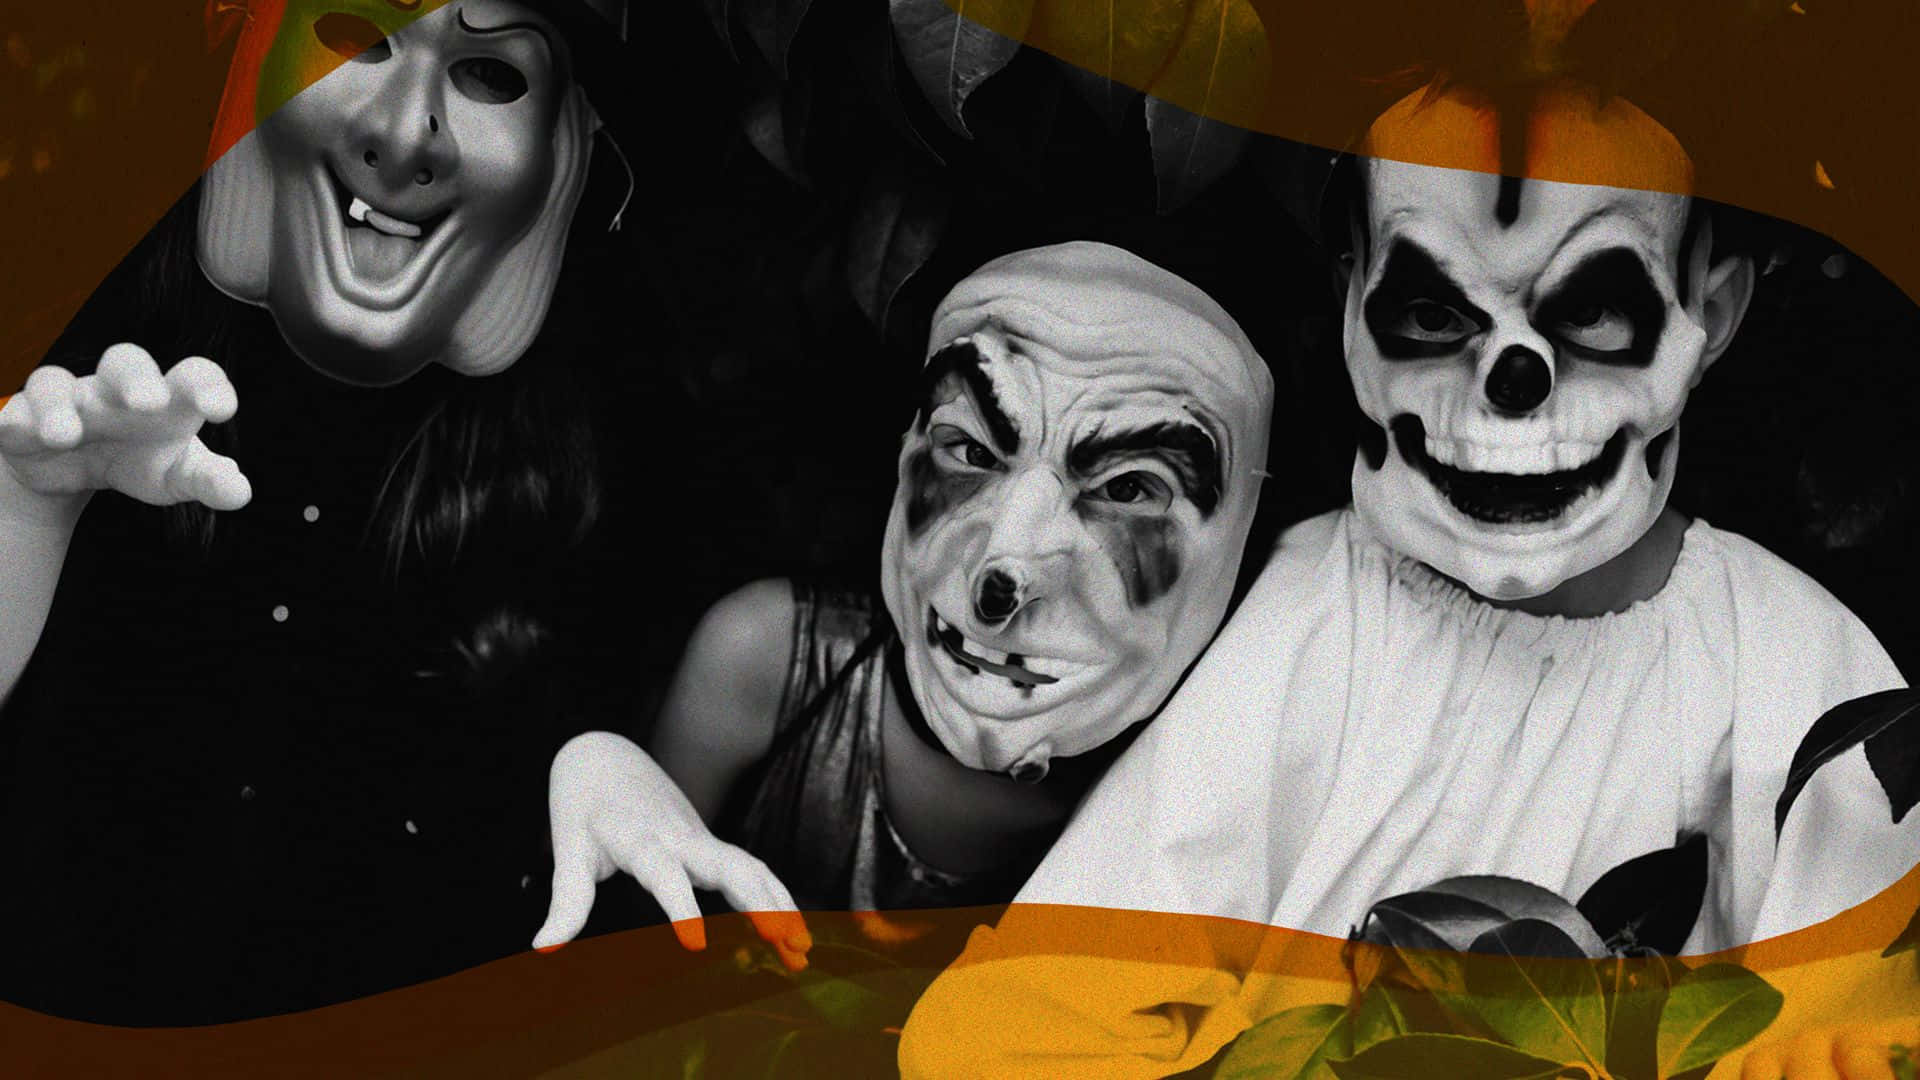 Get ready for a spooktacular Halloween with these frightful masks! Wallpaper